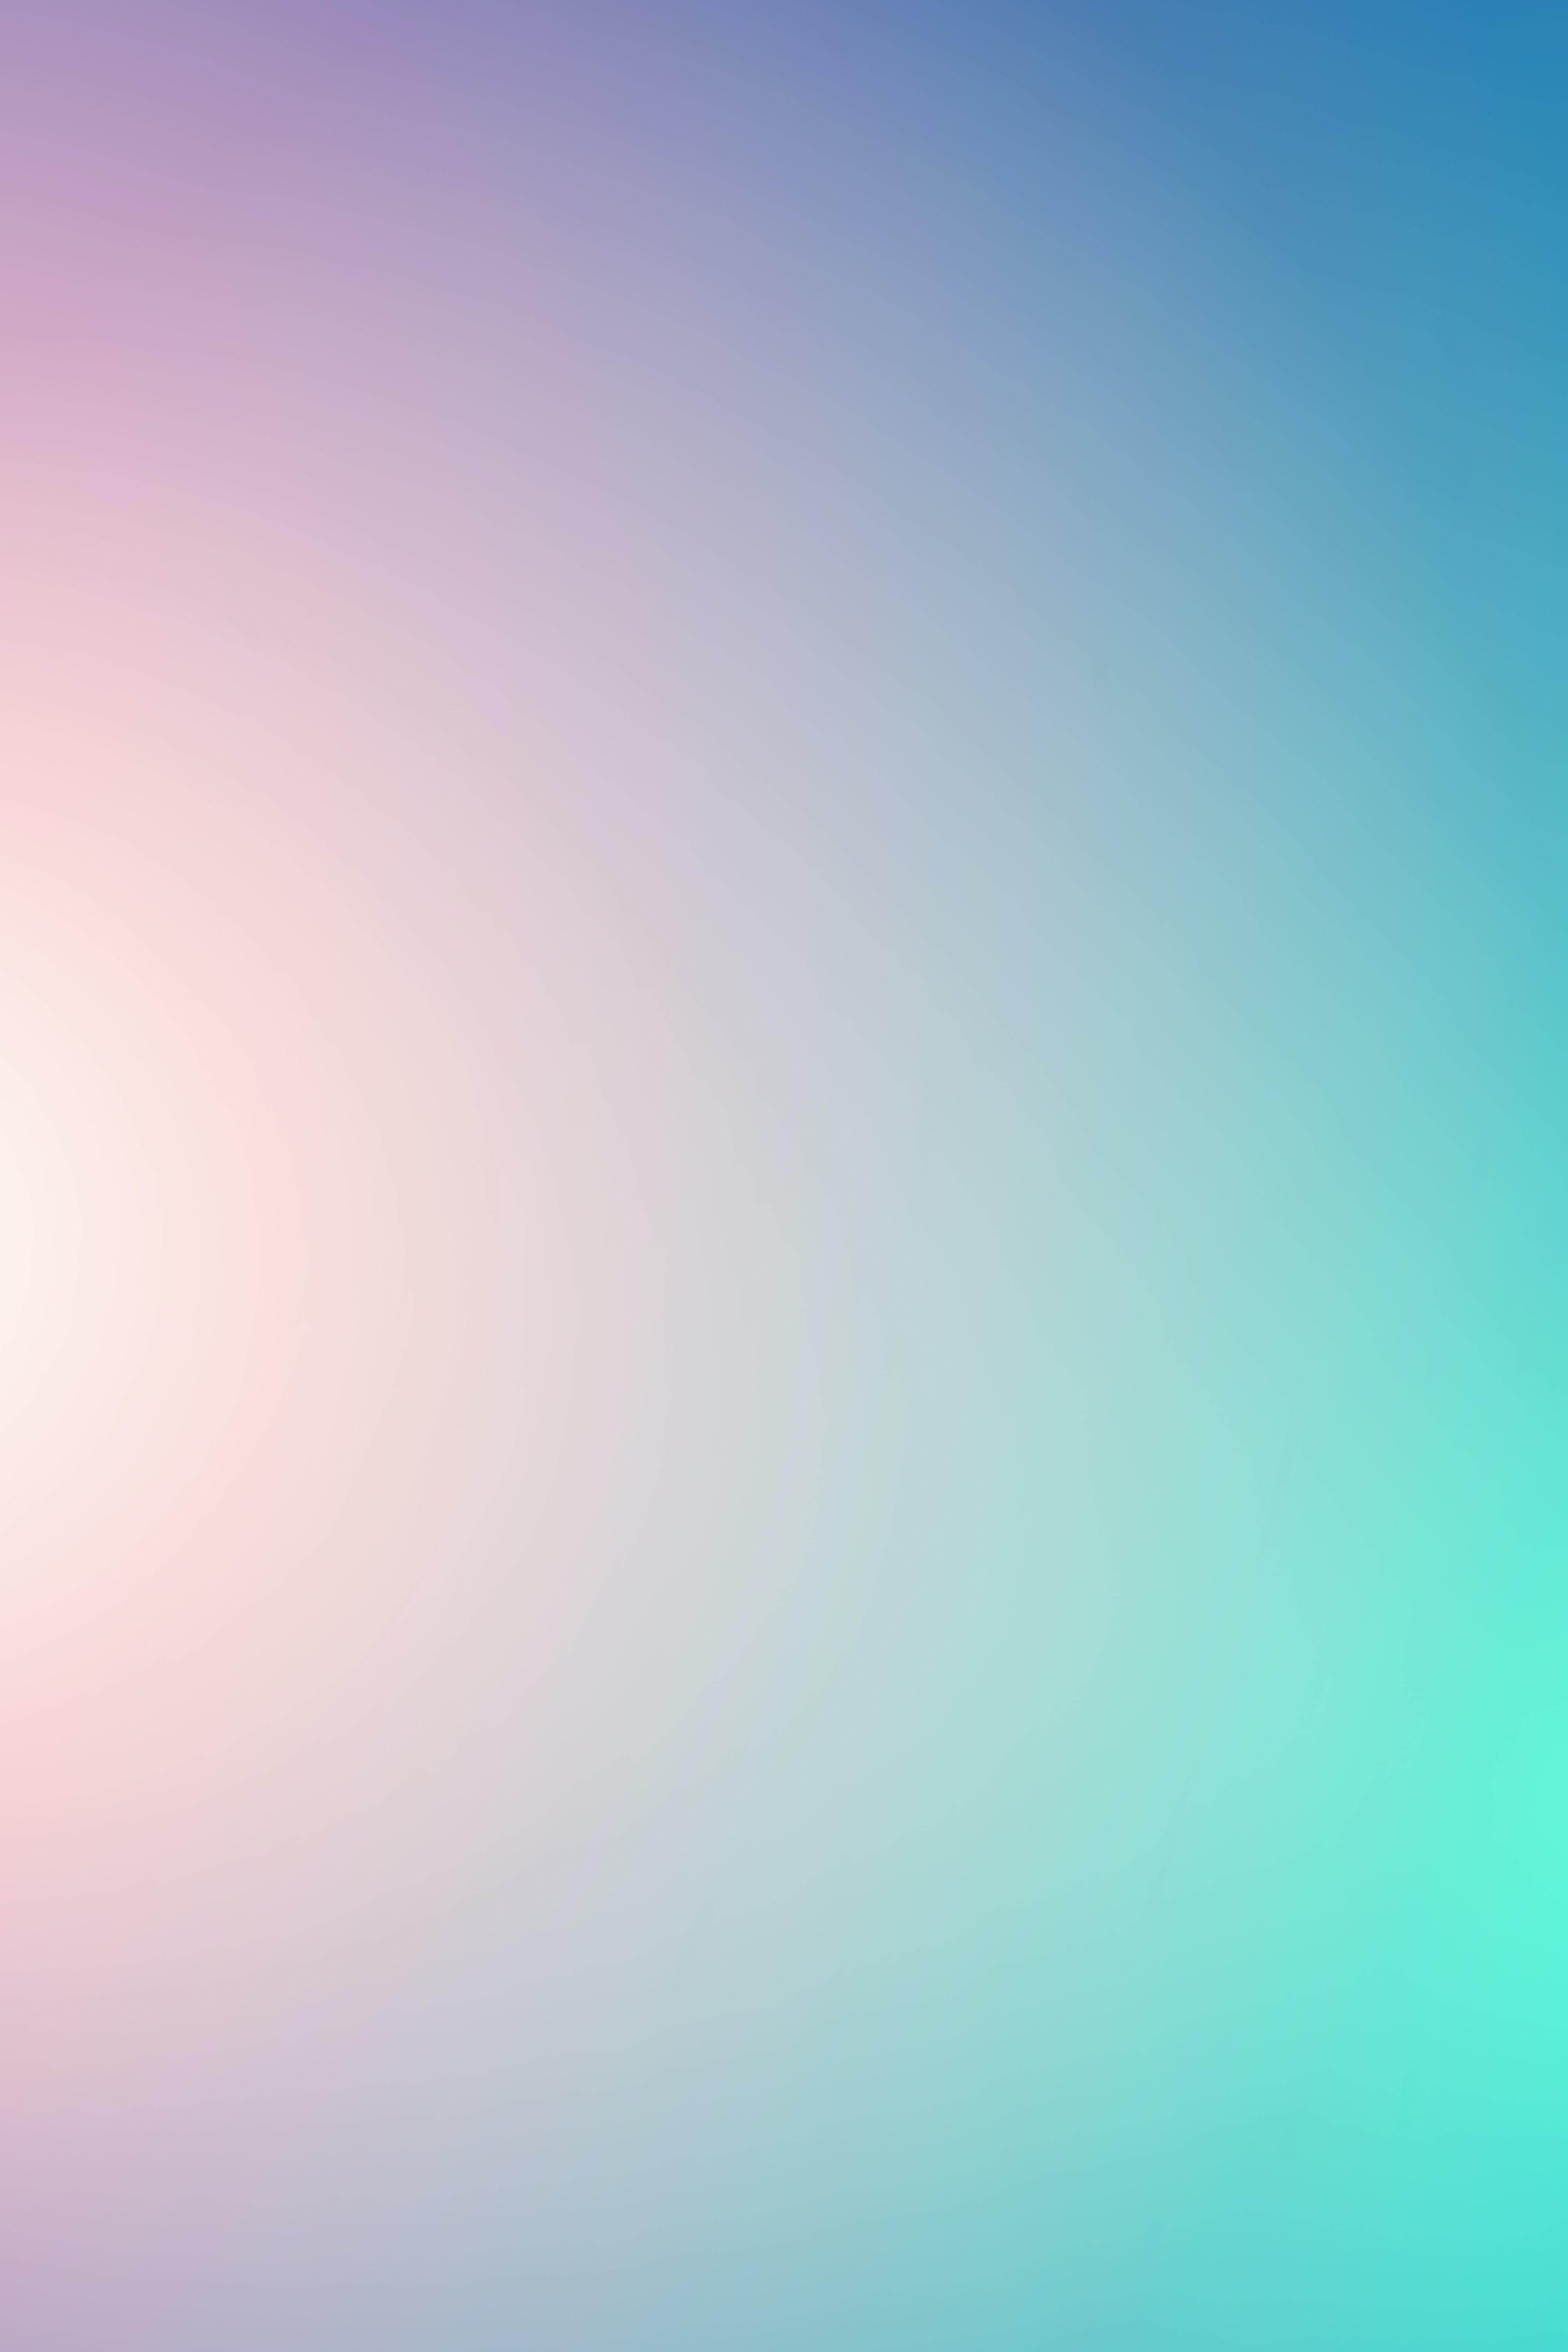 multicolored, gradient, motley, tender, abstract phone background